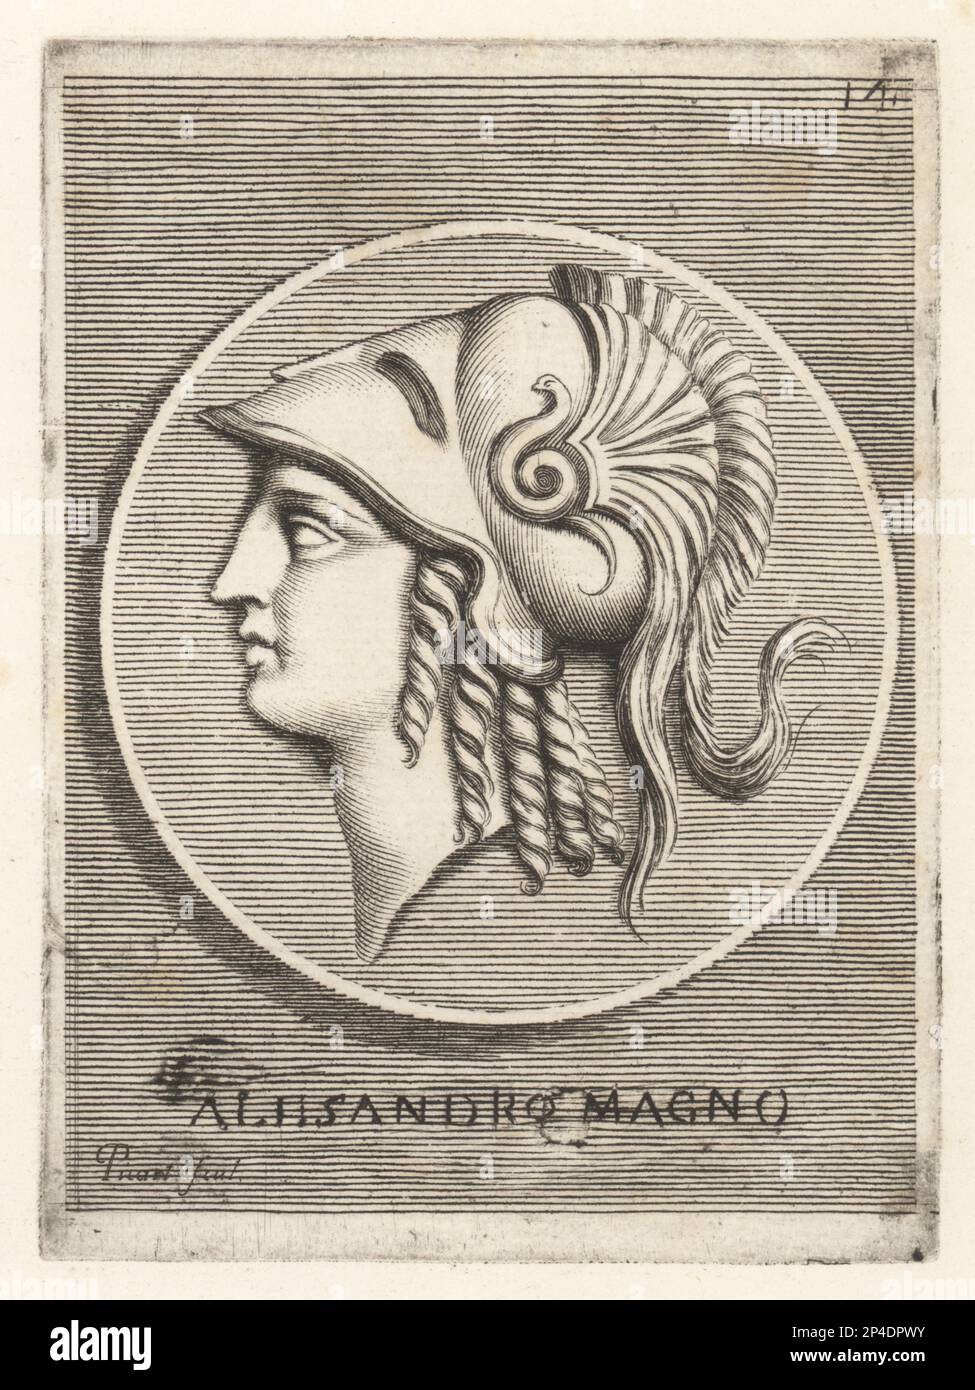 Profile portrait of Alexander the Great, Alexander III of Macedon, 356 – 323 BC, king of the ancient Greek kingdom of Macedon. Wearing a Corinthian helmet decorated with three feathers and a serpent. From a gold coin in the collection of Cardinal Camillo Massimo. Alessandro Magno. Copperplate engraving by Etienne Picart after Giovanni Angelo Canini from Iconografia, cioe disegni d'imagini de famosissimi monarchi, regi, filososi, poeti ed oratori dell' Antichita, Drawings of images of famous monarchs, kings, philosophers, poets and orators of Antiquity, Ignatio de’Lazari, Rome, 1699. Stock Photo